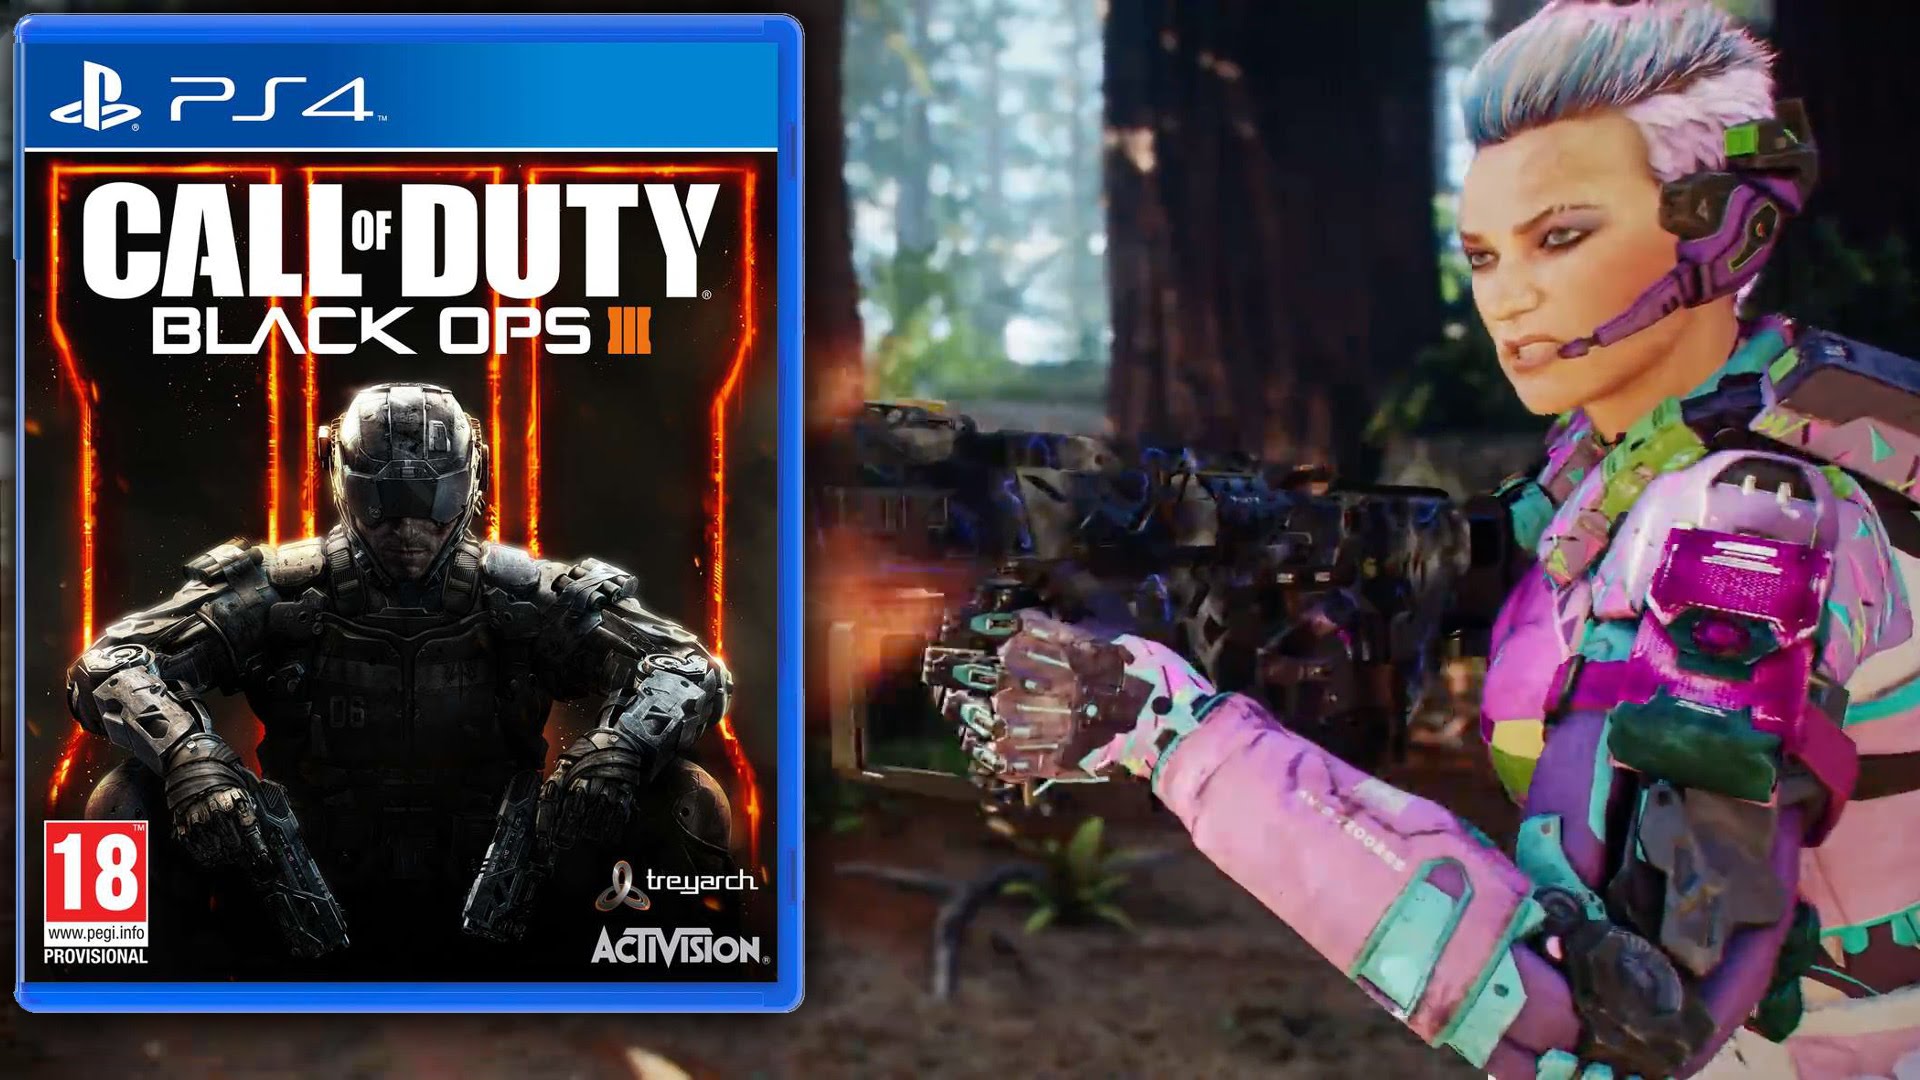 Featured Image for Parents' Guide to Call of Duty Black Ops III 